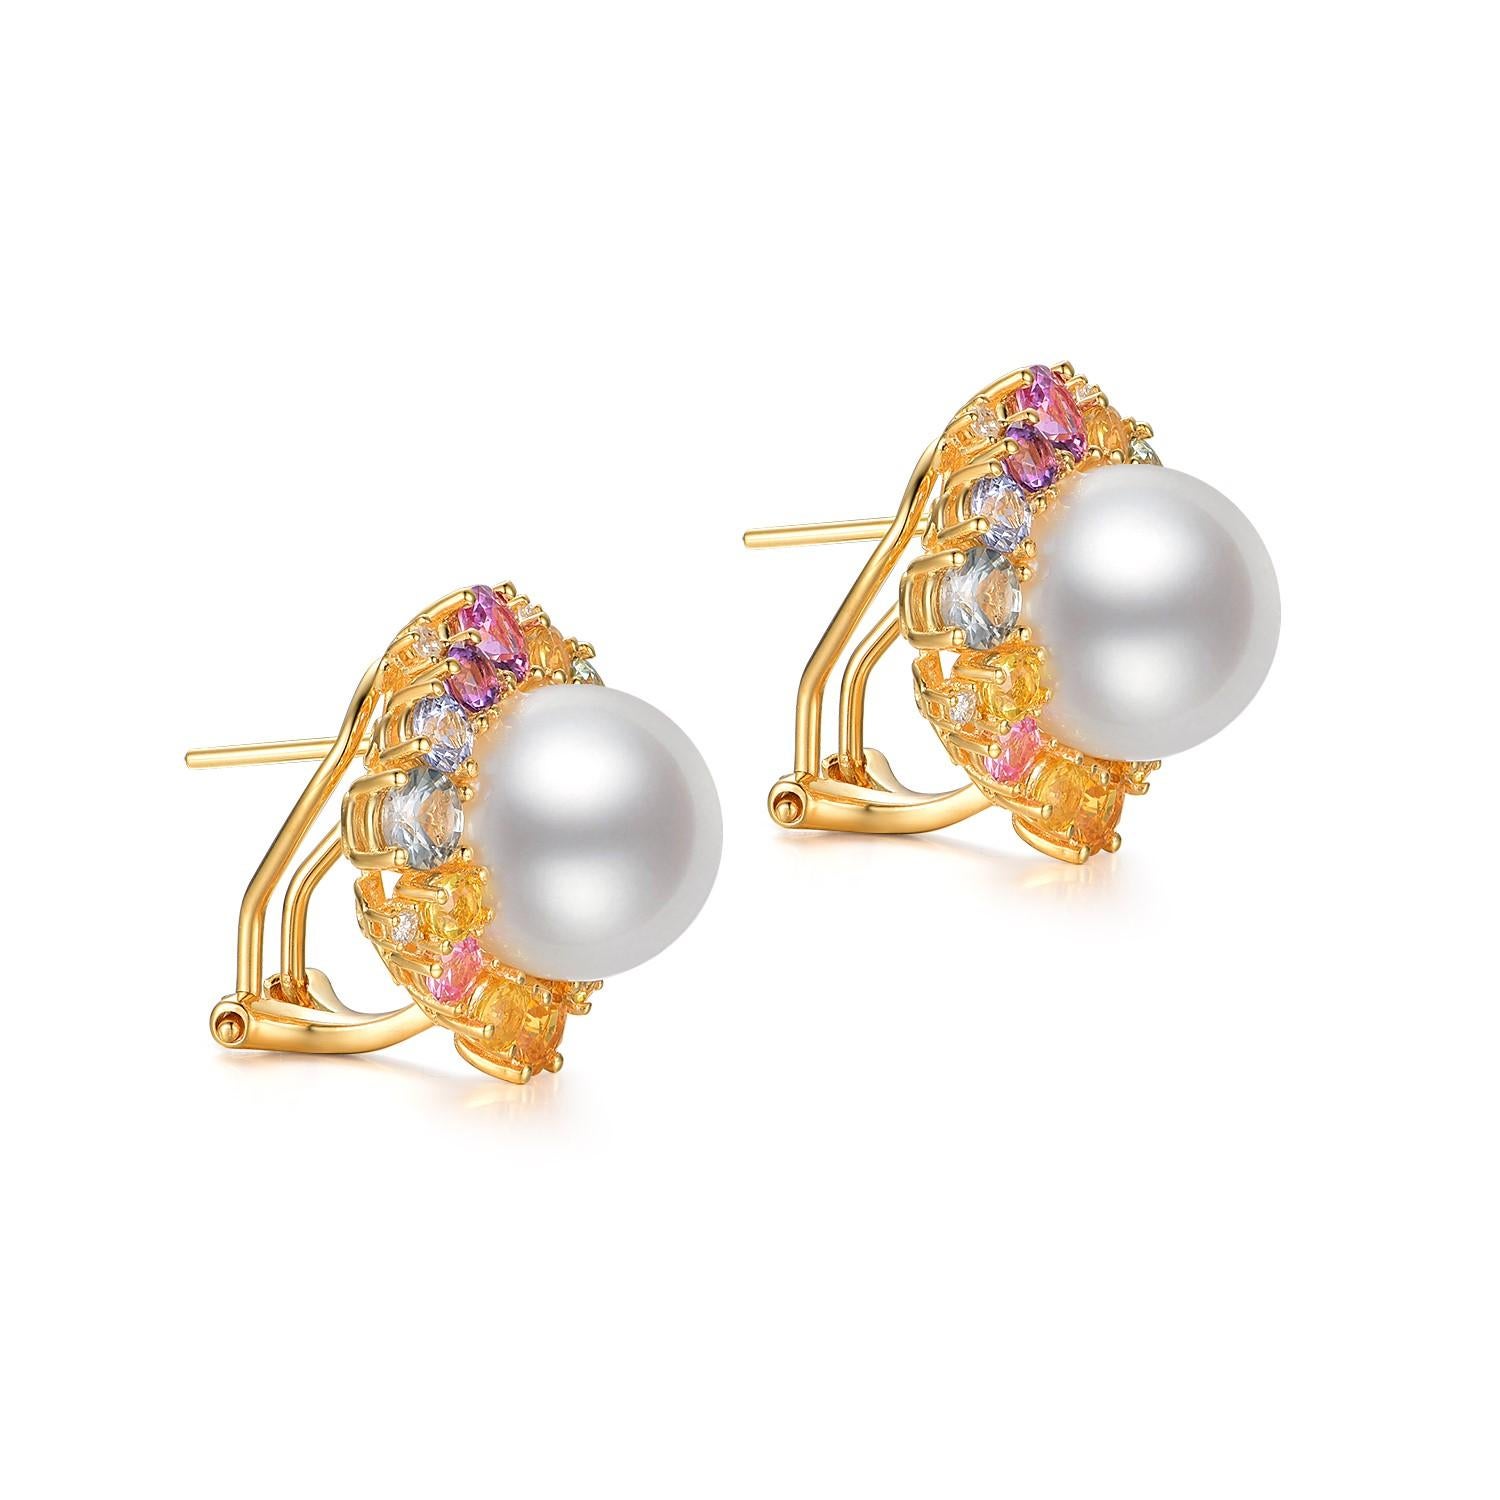 Emanating a spectrum of light, these 18K gold vermeil sterling silver earrings are adorned with 11mm South Sea pearls, noted for their impressive size and the exceptional quality of their luster, bringing a touch of classic elegance and timeless